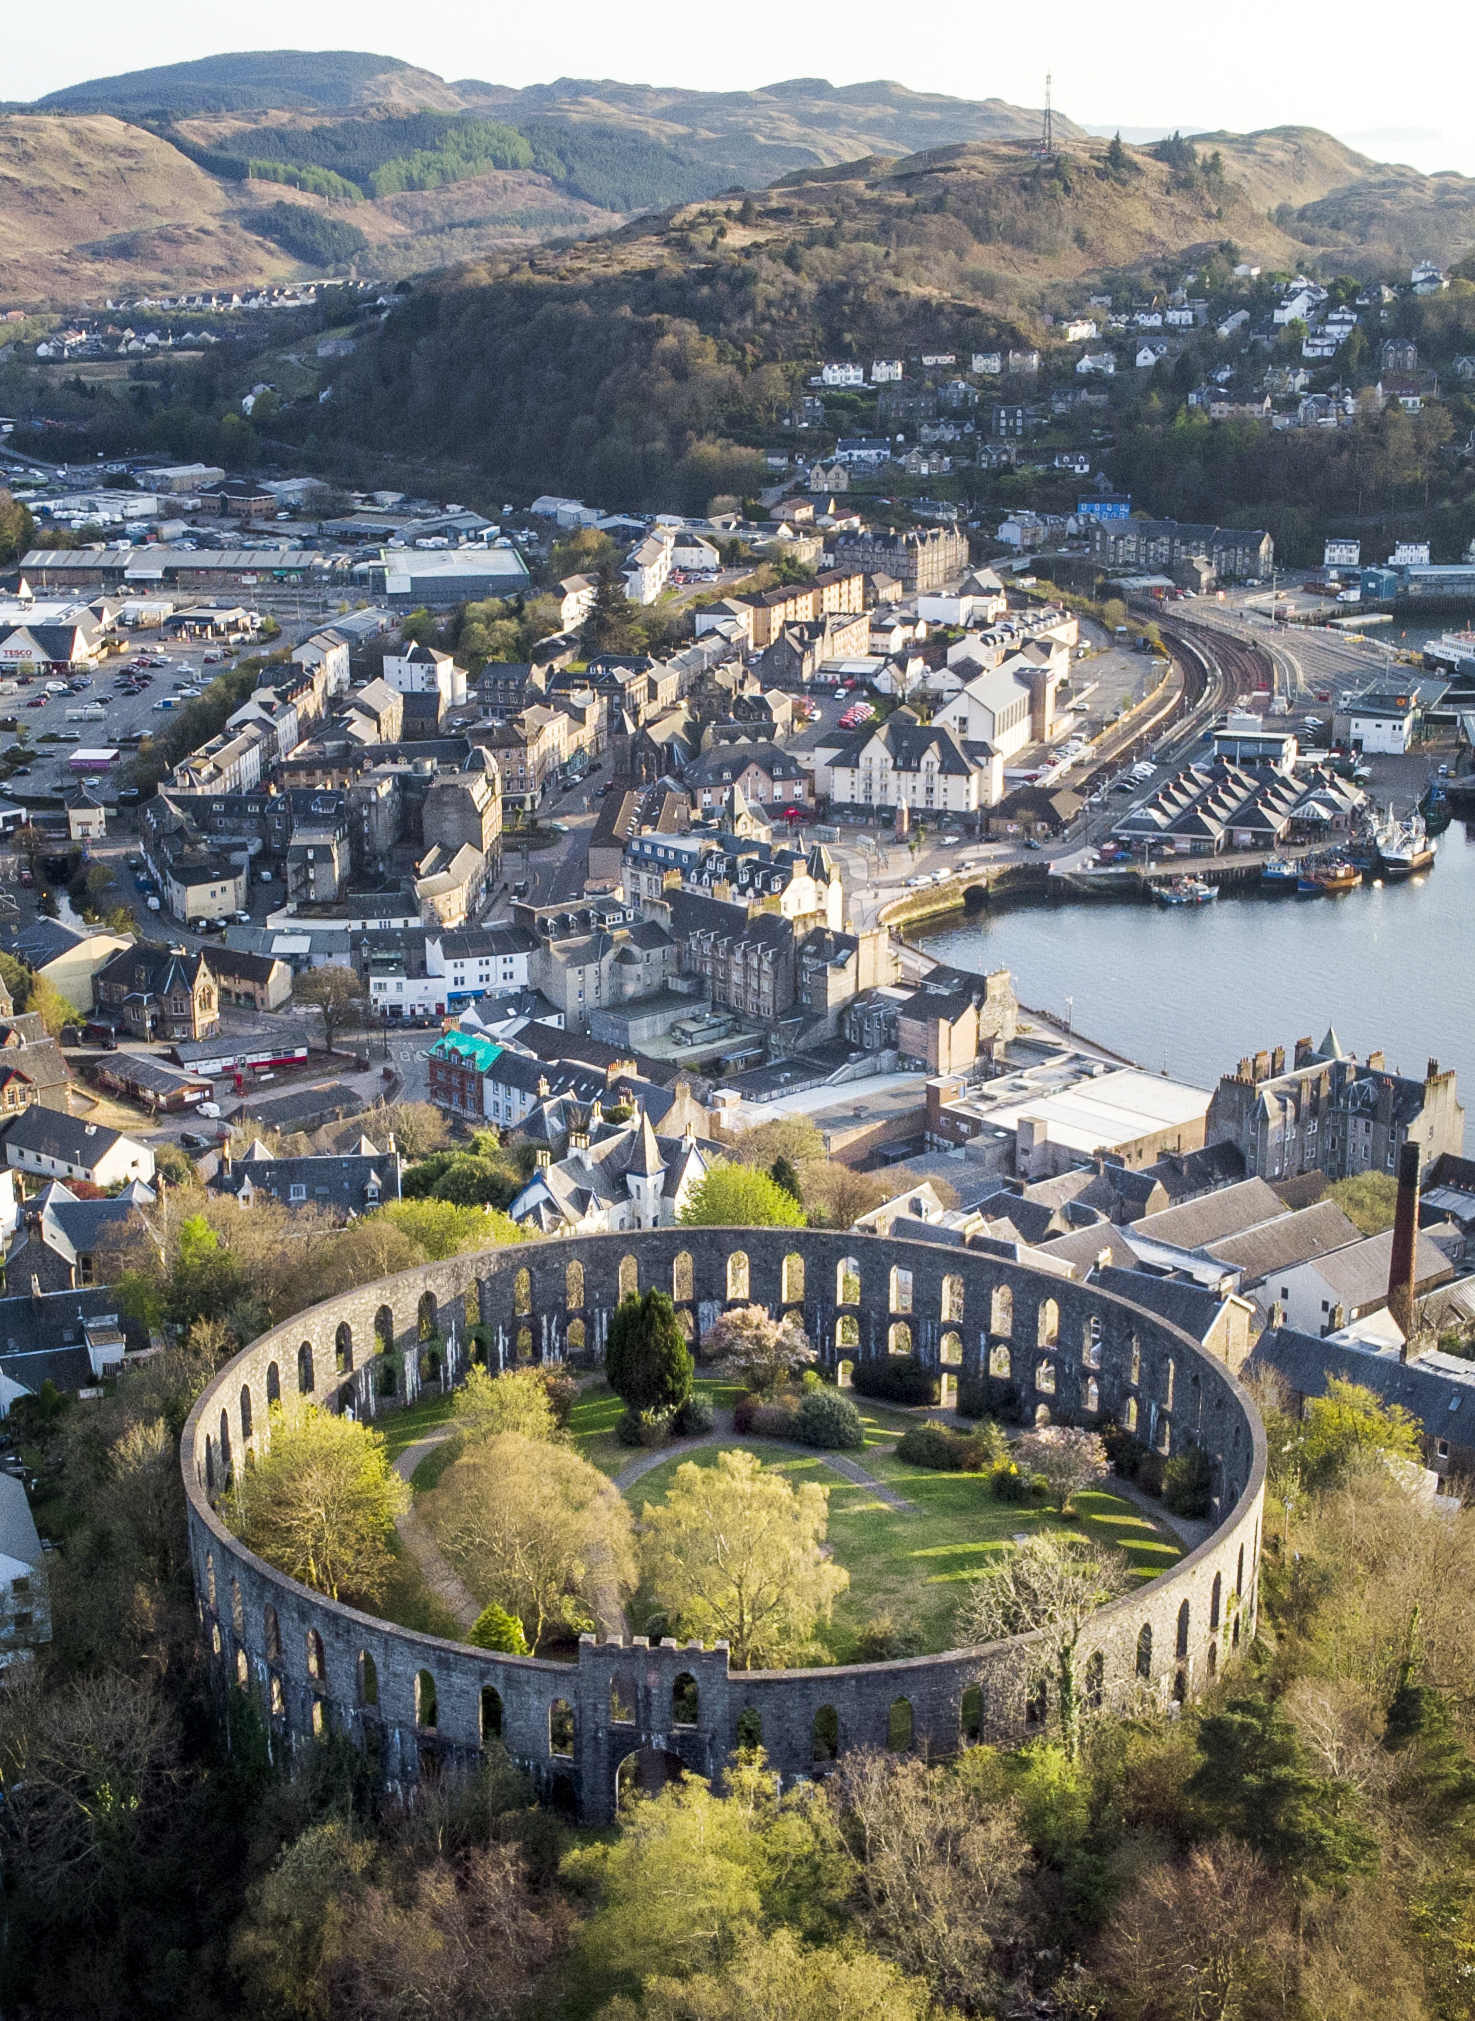 <em>McCaig’s Tower overlooking the town of Oban (Jane Barlow/PA)</em>”/><cite class=cite>PA Wire</cite></div><figcaption aria-hidden=true><em>McCaig’s Tower overlooking the town of Oban (Jane Barlow/PA)</em> <cite class=hidden>PA Wire</cite></figcaption></figure><p>Aquarela, directed by Viktor Kossakovsky and described as “the most dangerous documentary ever made”, looks at the awesome and destructive power of water, and will be shown in a free public screening at McCaig’s Tower in Oban in partnership with Oban Phoenix on September 24.</p><p>Originally the festival was planned as a winter event using projections. However, because of lockdown delays and long Scottish summer days the films will mostly be shown on giant LED screens, rather than projected onto buildings and landscapes.</p><p>The team behind Cinescapes will also create supporting material which will be shared with the online audience around the world.</p><p>Isobel Salamon, founder of the Edinburgh Cinema Club and co-producer of Cinescapes, said: “We are creating a series of interviews featuring directors, actors and people involved in each of the films.</p><p>“We are also putting together a visual guide to each of the areas the film is inspired by and long form podcasts.</p><p>“For the local audience Cinescapes Festival will be a community event, but for movie buffs around the world it will give a deep dive into the films and an insight into the landscapes that inspired them.”</p><p>The festival is supported by Film Hub Scotland and the Scotland’s Events Recovery Fund, which was set up by EventScotland in collaboration with the Scottish Government to support Scotland’s events sector plan and deliver events through to the end of 2021, and help it respond and adapt to the effects of the pandemic.</p><p>Paul Bush, VisitScotland’s director of events, said: “Through innovation and creativity, local communities will be able to celebrate Scottish film in the locations that inspired them while those further afield can join in the fun online.</p><p>“Scotland is the perfect stage for events and supporting events, including Cinescapes Festival, is crucial in our recovery from the pandemic.”</p><p>More information can be found <a href=https://cinetopiashow.com/cinescapes>here</a>.</p><div class=